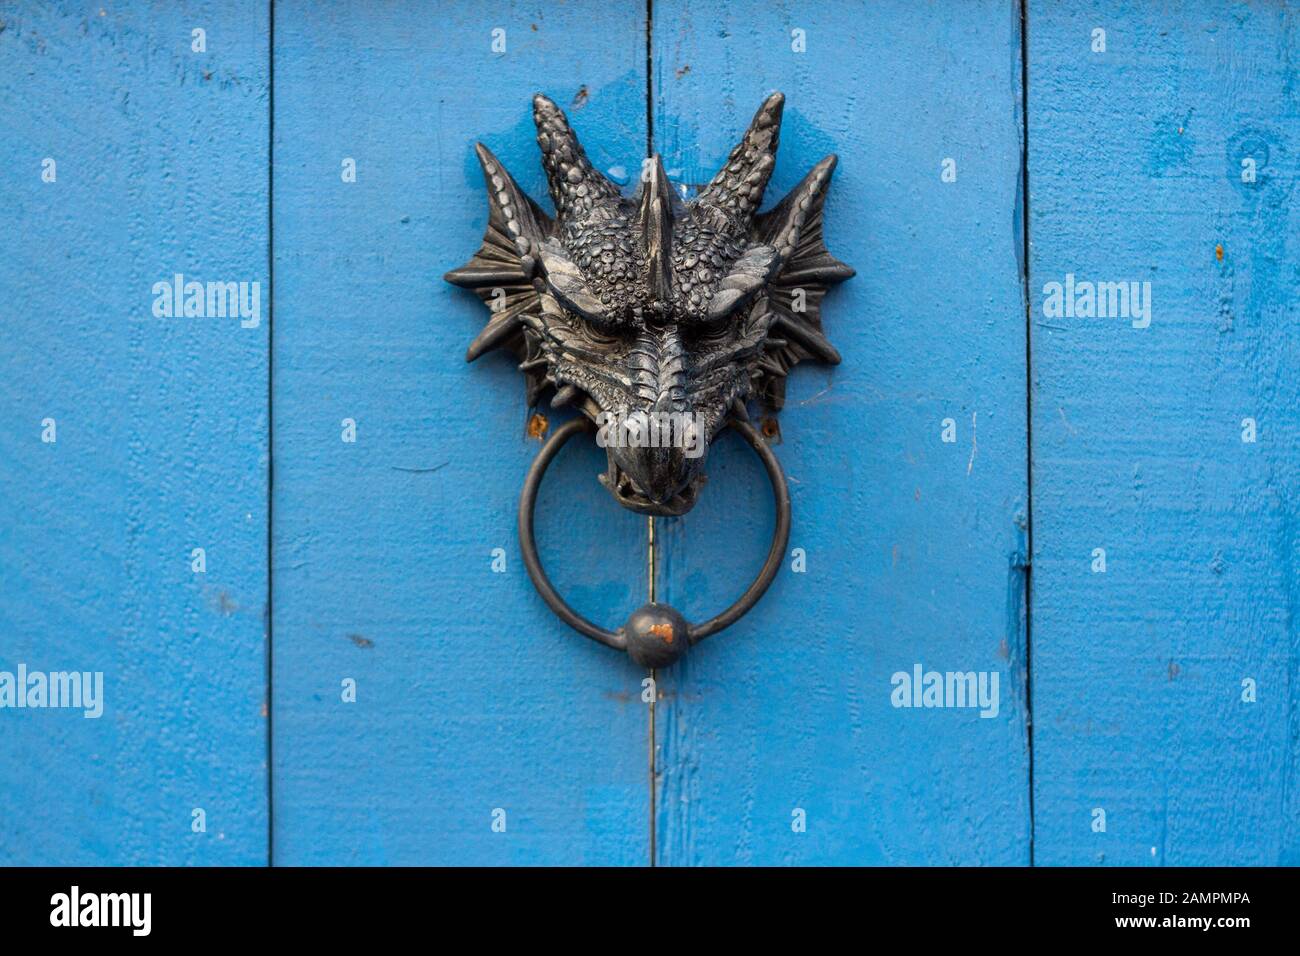 Ornate metal door knocker in the shape of a dragon's head holding the ring in it's mouth Stock Photo